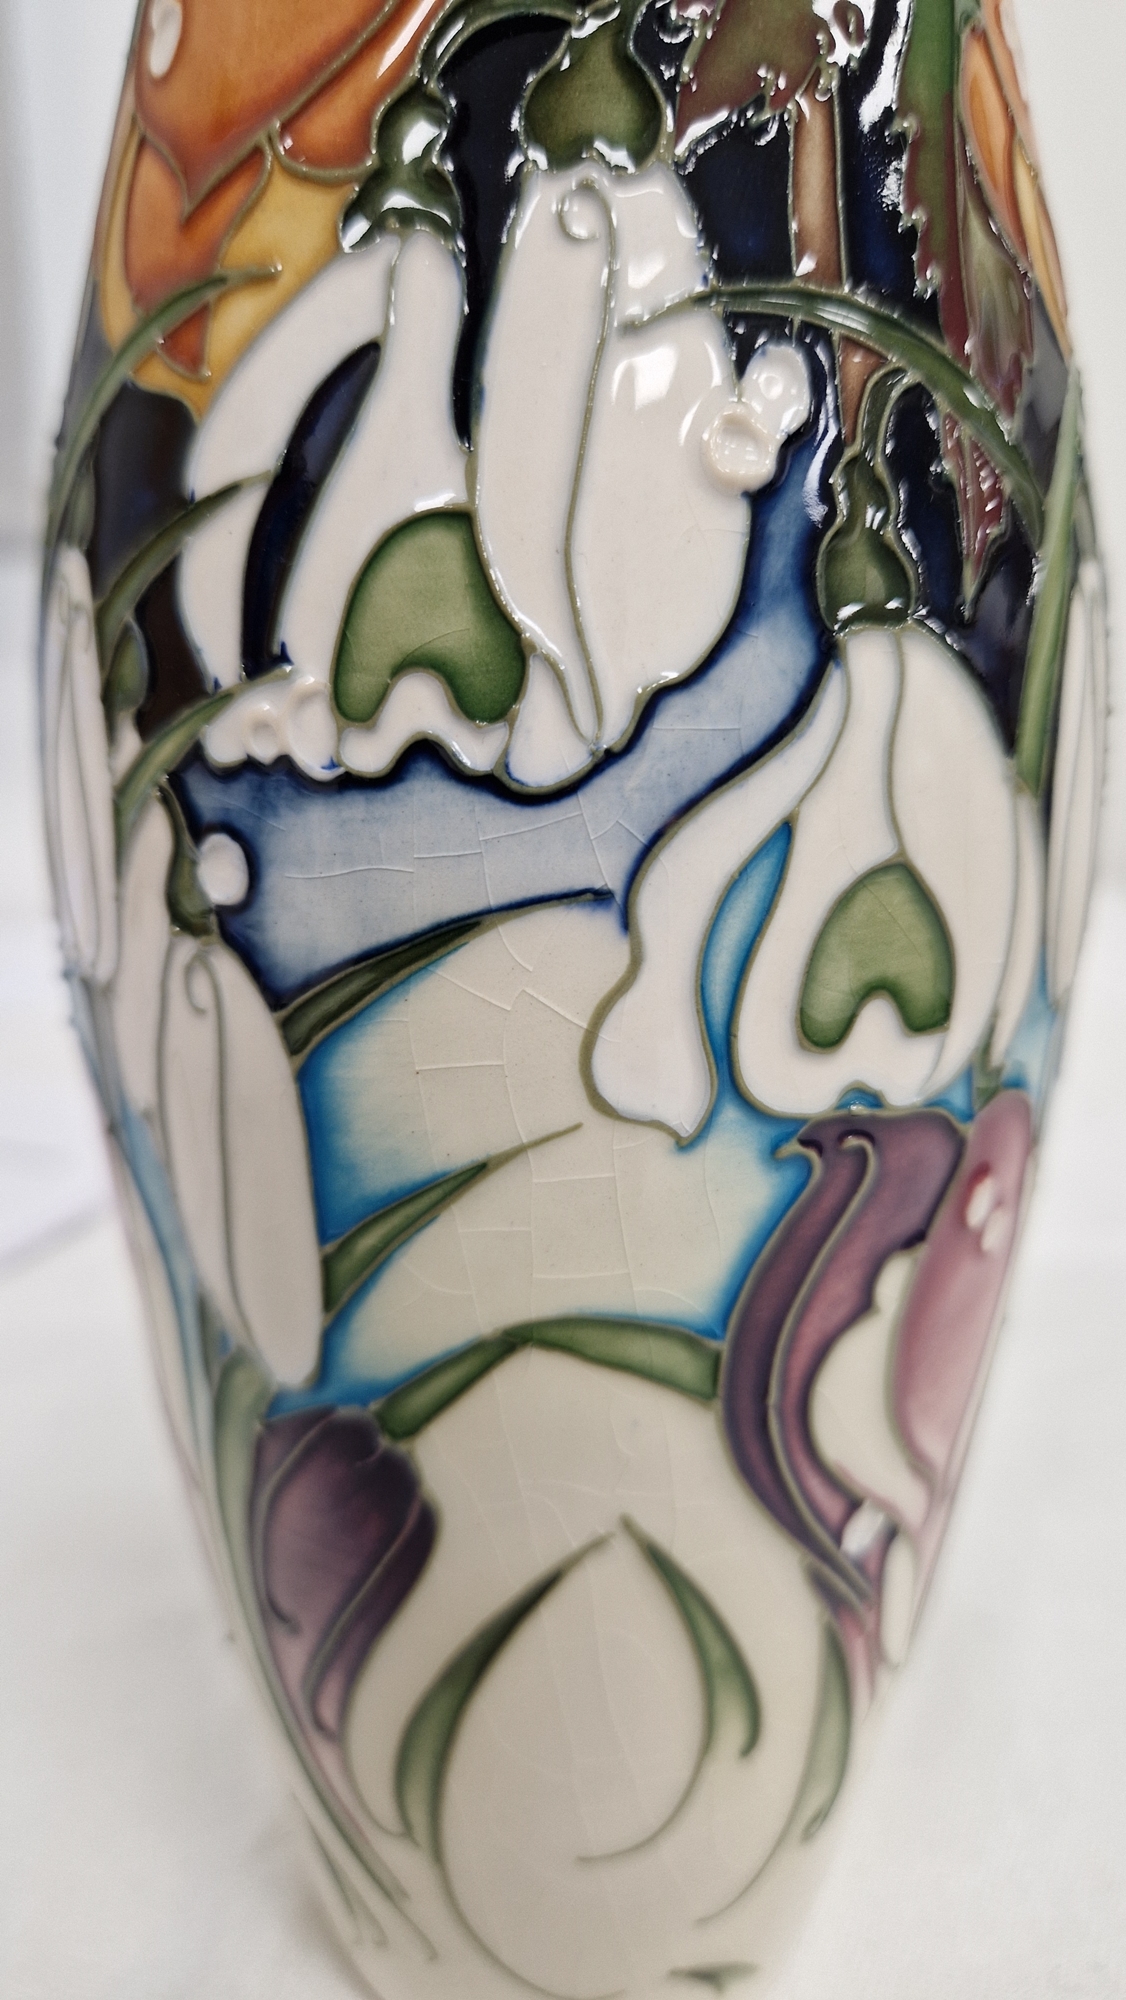 Moorcroft Snow Time pattern tapered baluster vase by Emma Bossons, printed and impressed marks, - Image 17 of 22